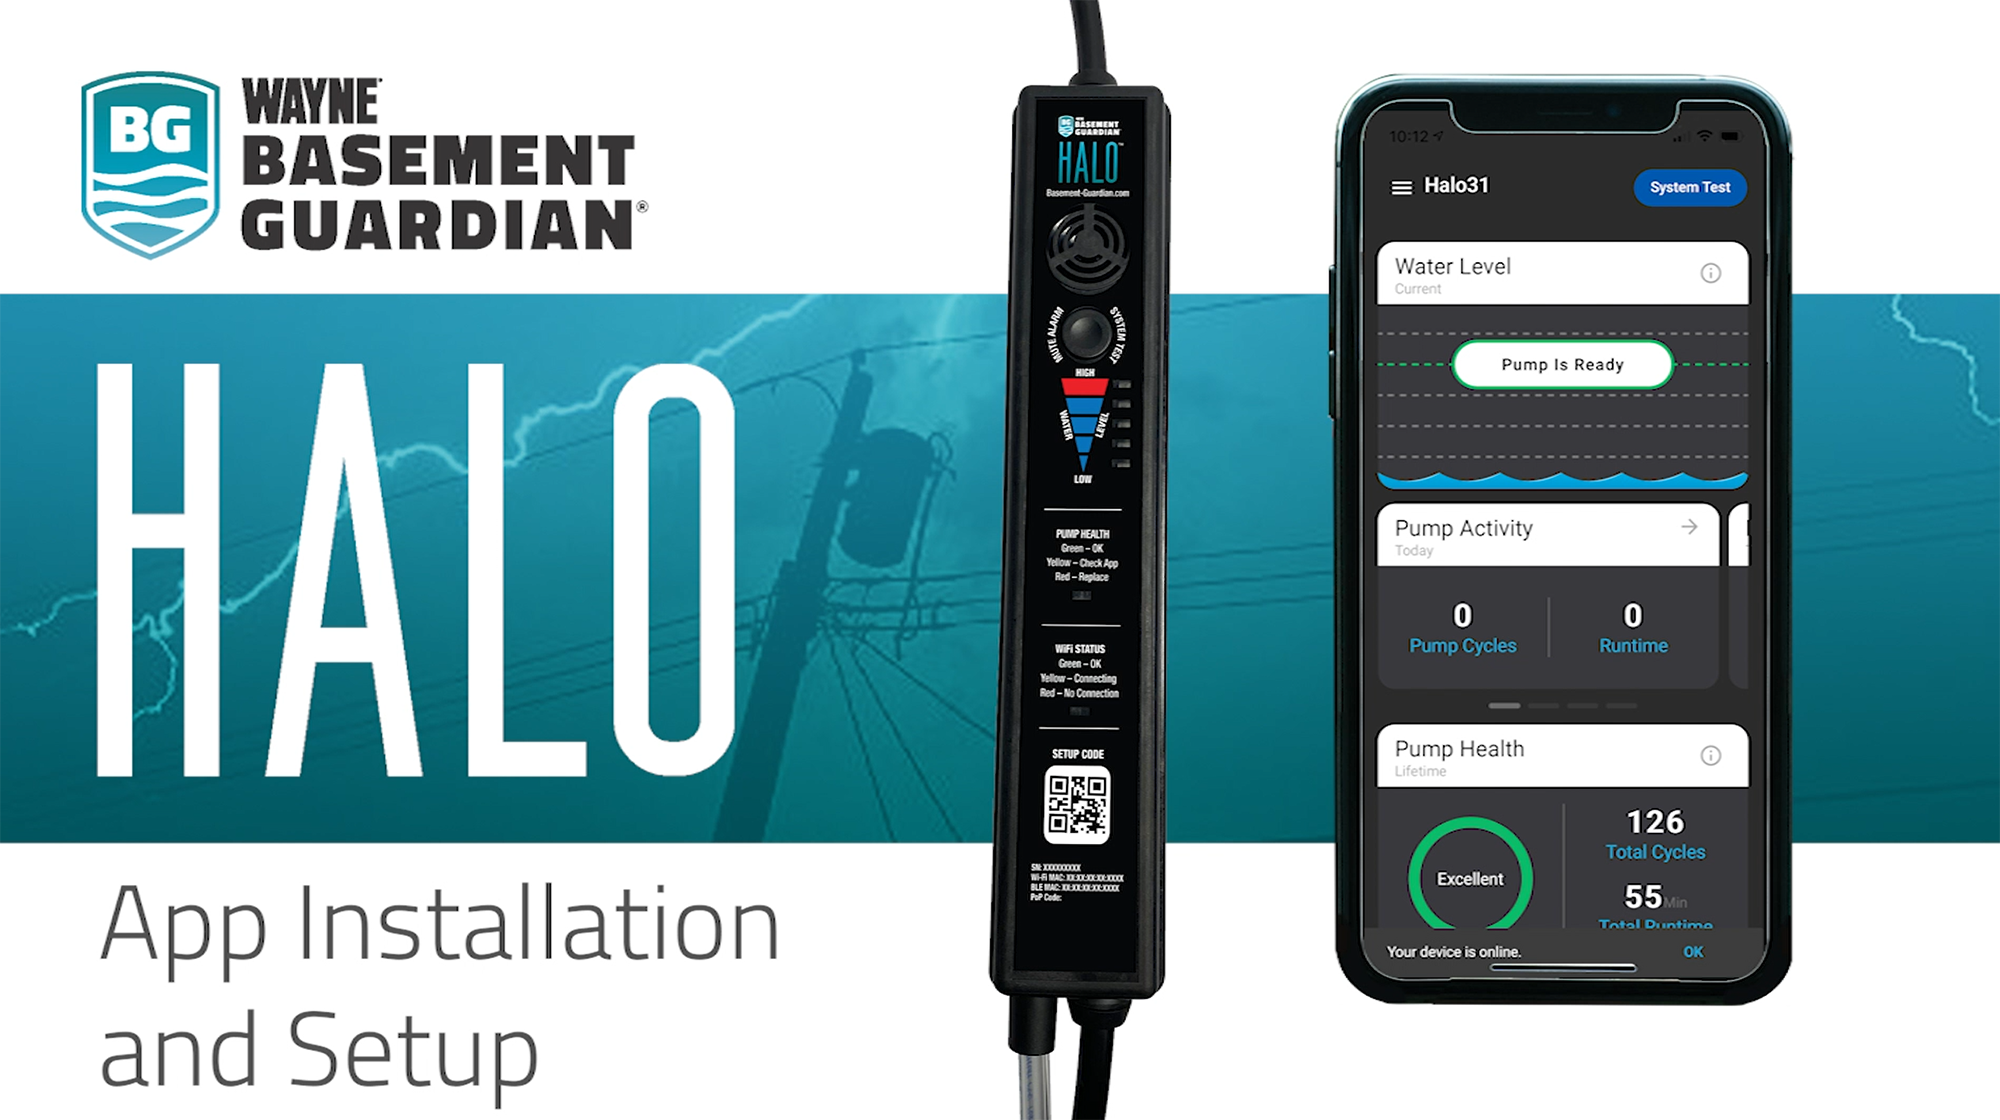 Basement Guardian Halo smart sump pump app installation and overview video.